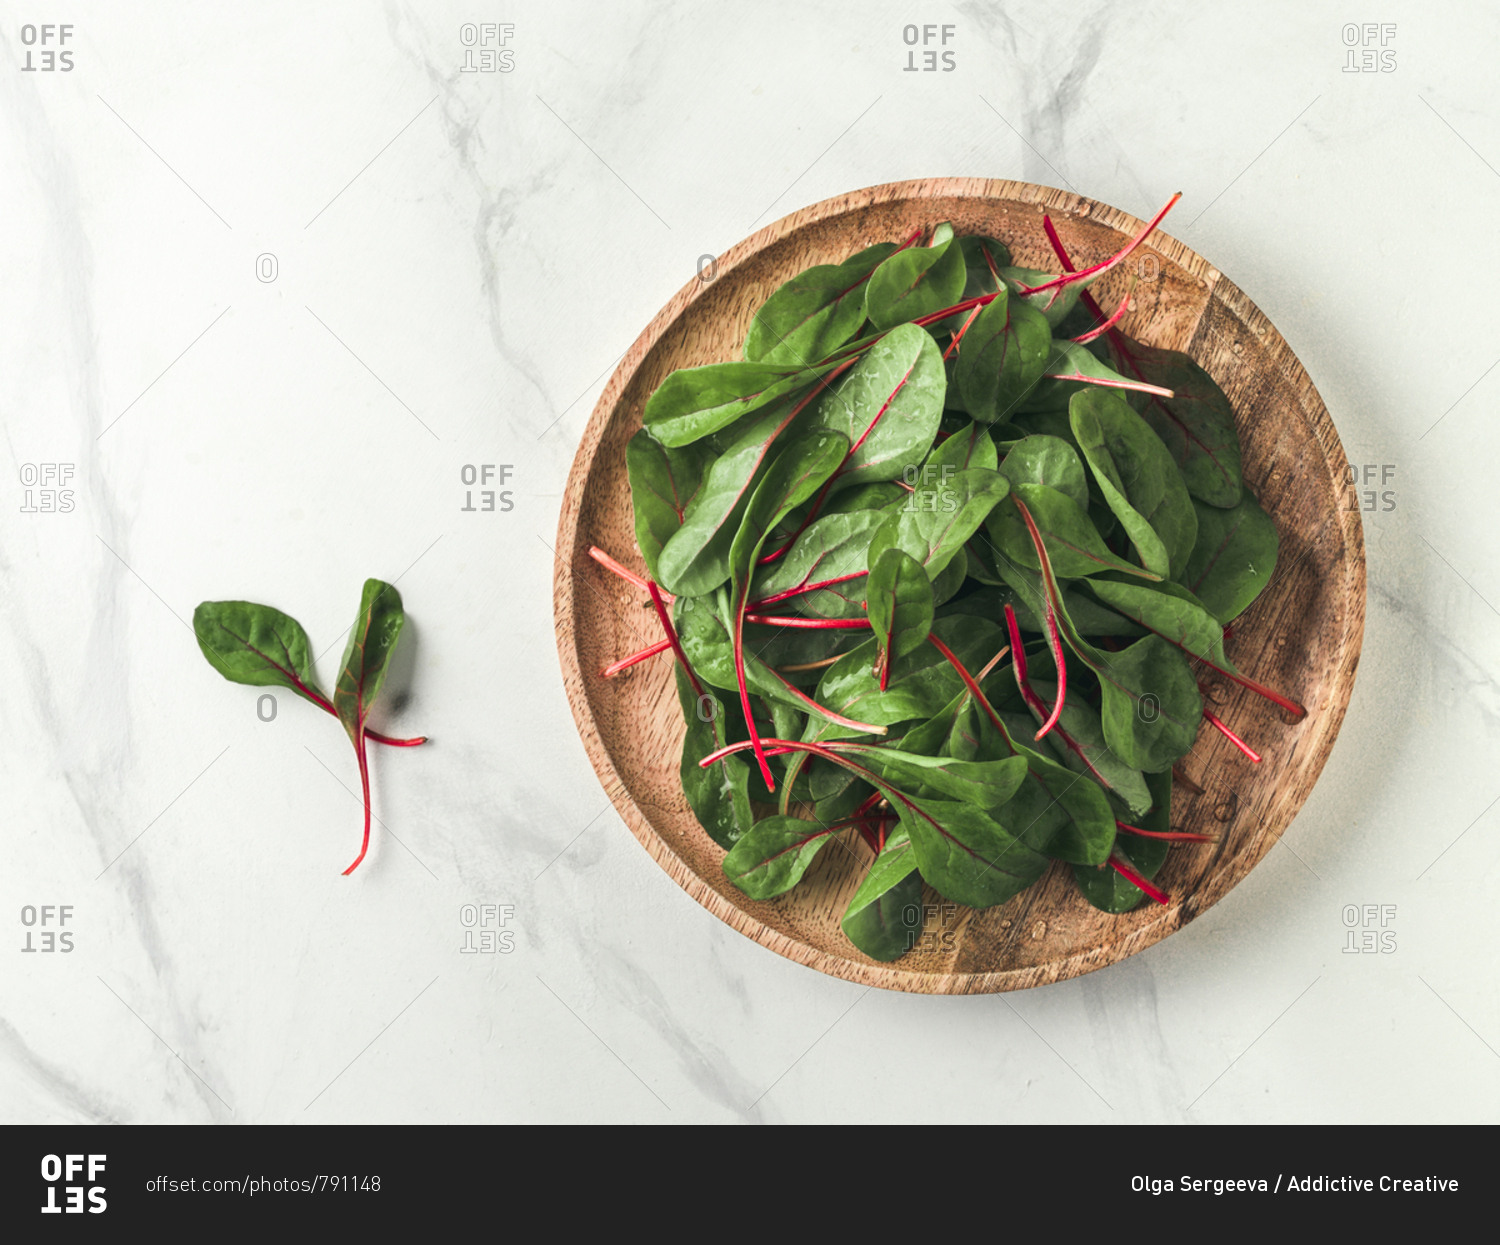 Fresh salad of green chard leaves or mangold on white marble background. Flat lay or top view fresh baby beet leaves on wooden plate. Copy space for text.